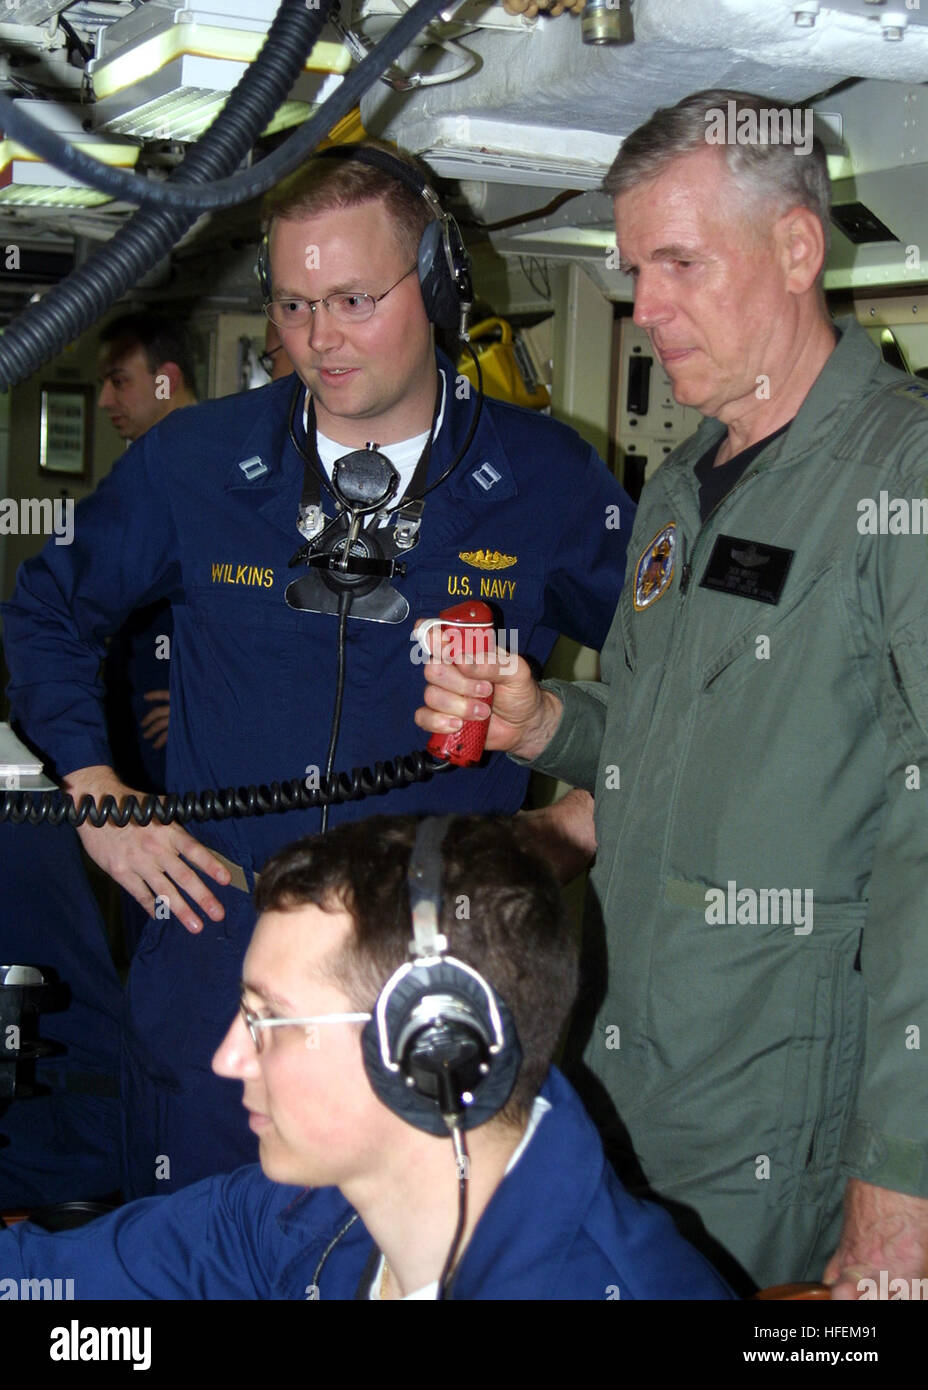 030628-N-2903K-002 At sea aboard USS Rhode Island (SSBN 740) Jun. 28, 2003 -- Gen. Richard B. Myers Chairman of the Joint Chiefs of Staff, takes part in the missile control center during a battle stations training exercise aboard the ballistic missile submarine USS Rhode Island (SSBN 740).  U.S. Navy photo by Journalist 3rd Class B.L. Keller.  (RELEASED) US Navy 030628-N-2903K-002 Gen. Richard B. Myers Chairman of the Joint Chiefs of Staff, takes part in the missile control center during a battle stations training exercise aboard the ballistic missile submarine USS Rhode Island Stock Photo